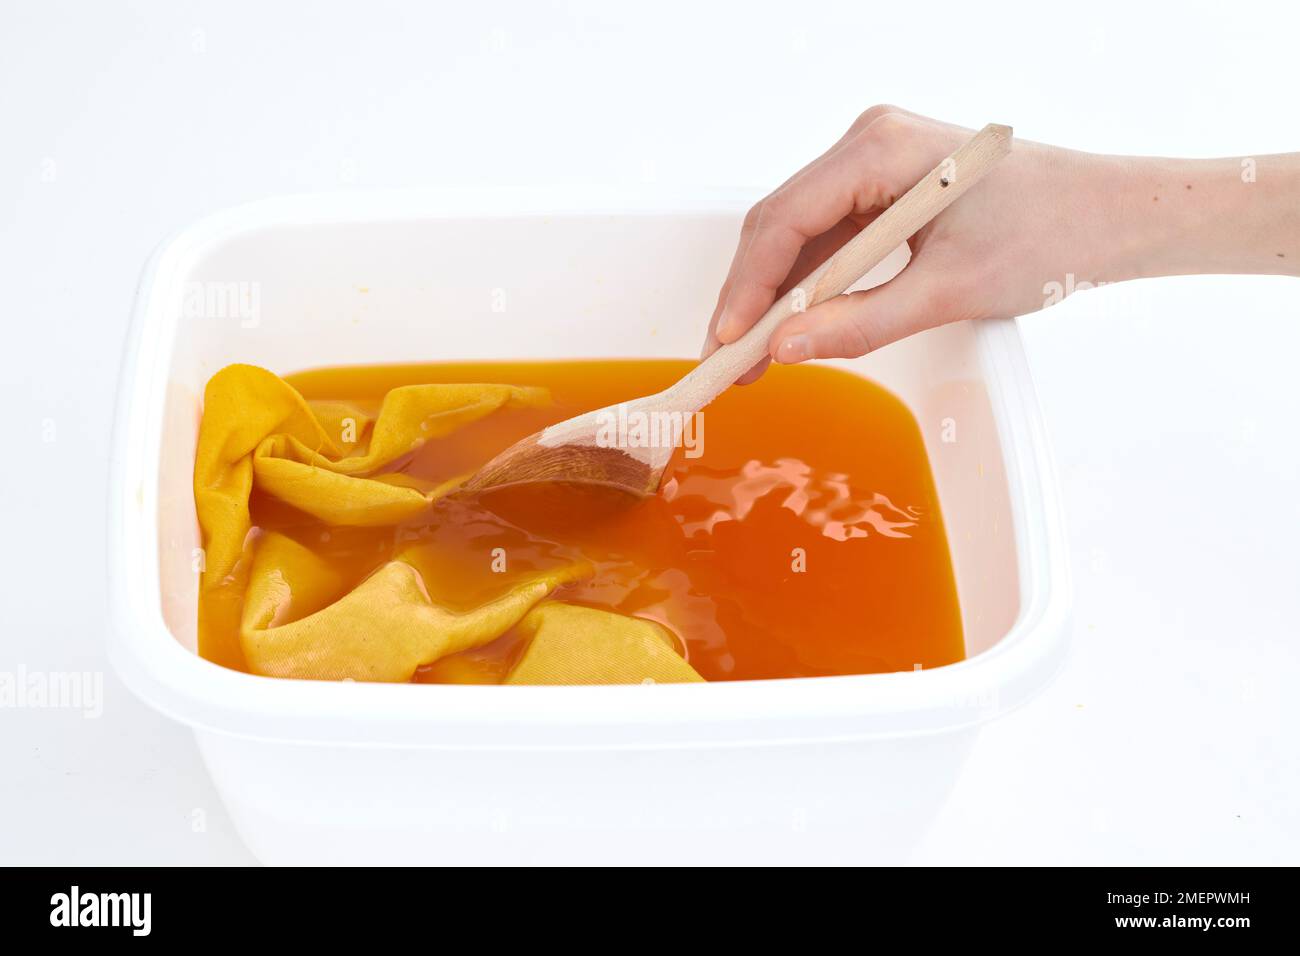 Dyeing fabric, using wooden spoon to move fabric in dye, close-up Stock Photo